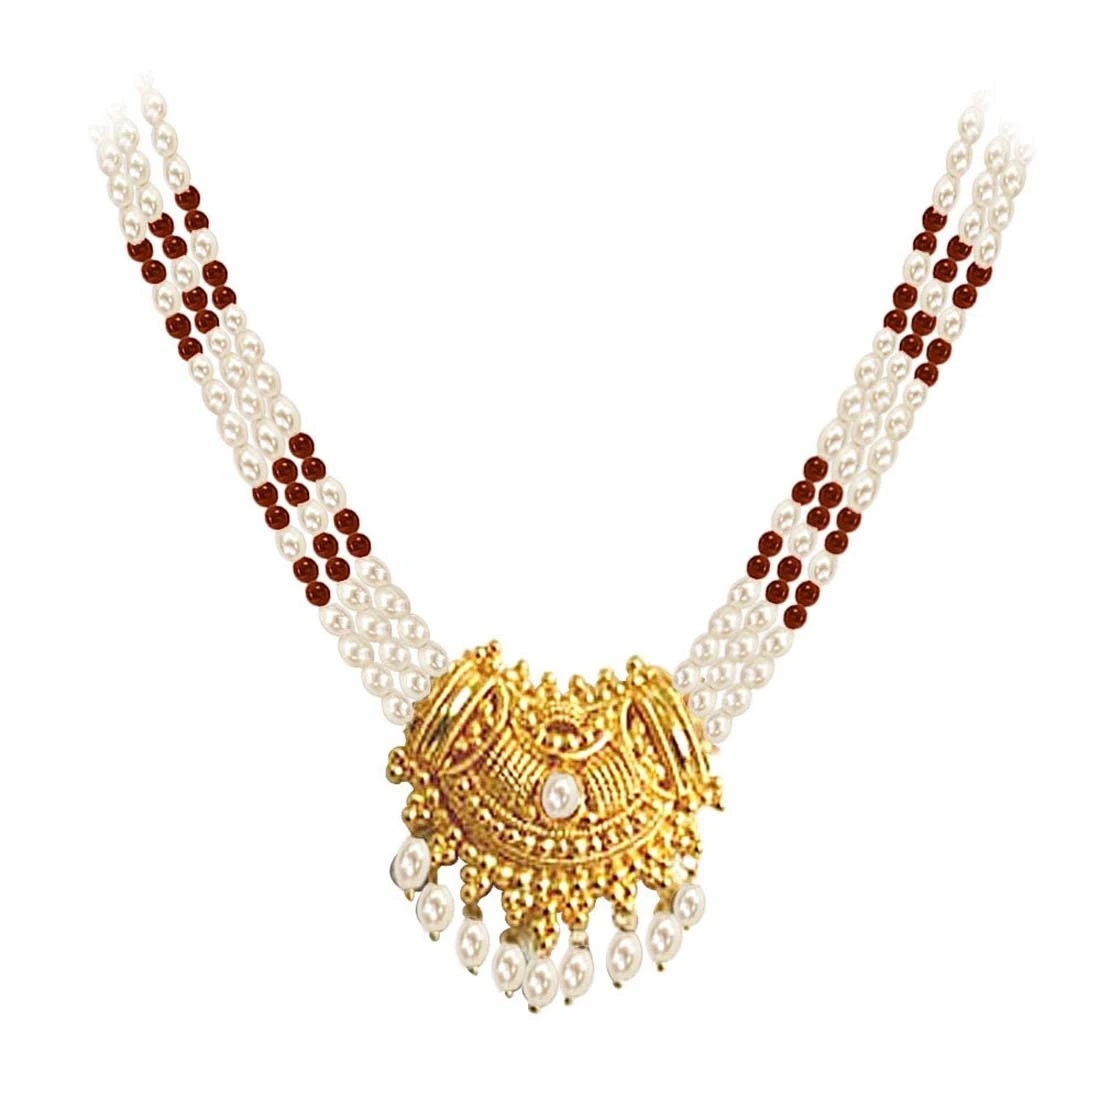 Gold Plated Temple Design Pendant & 3 Line Rice Pearl & Garnet Beads Necklace for Women (SNP4A)